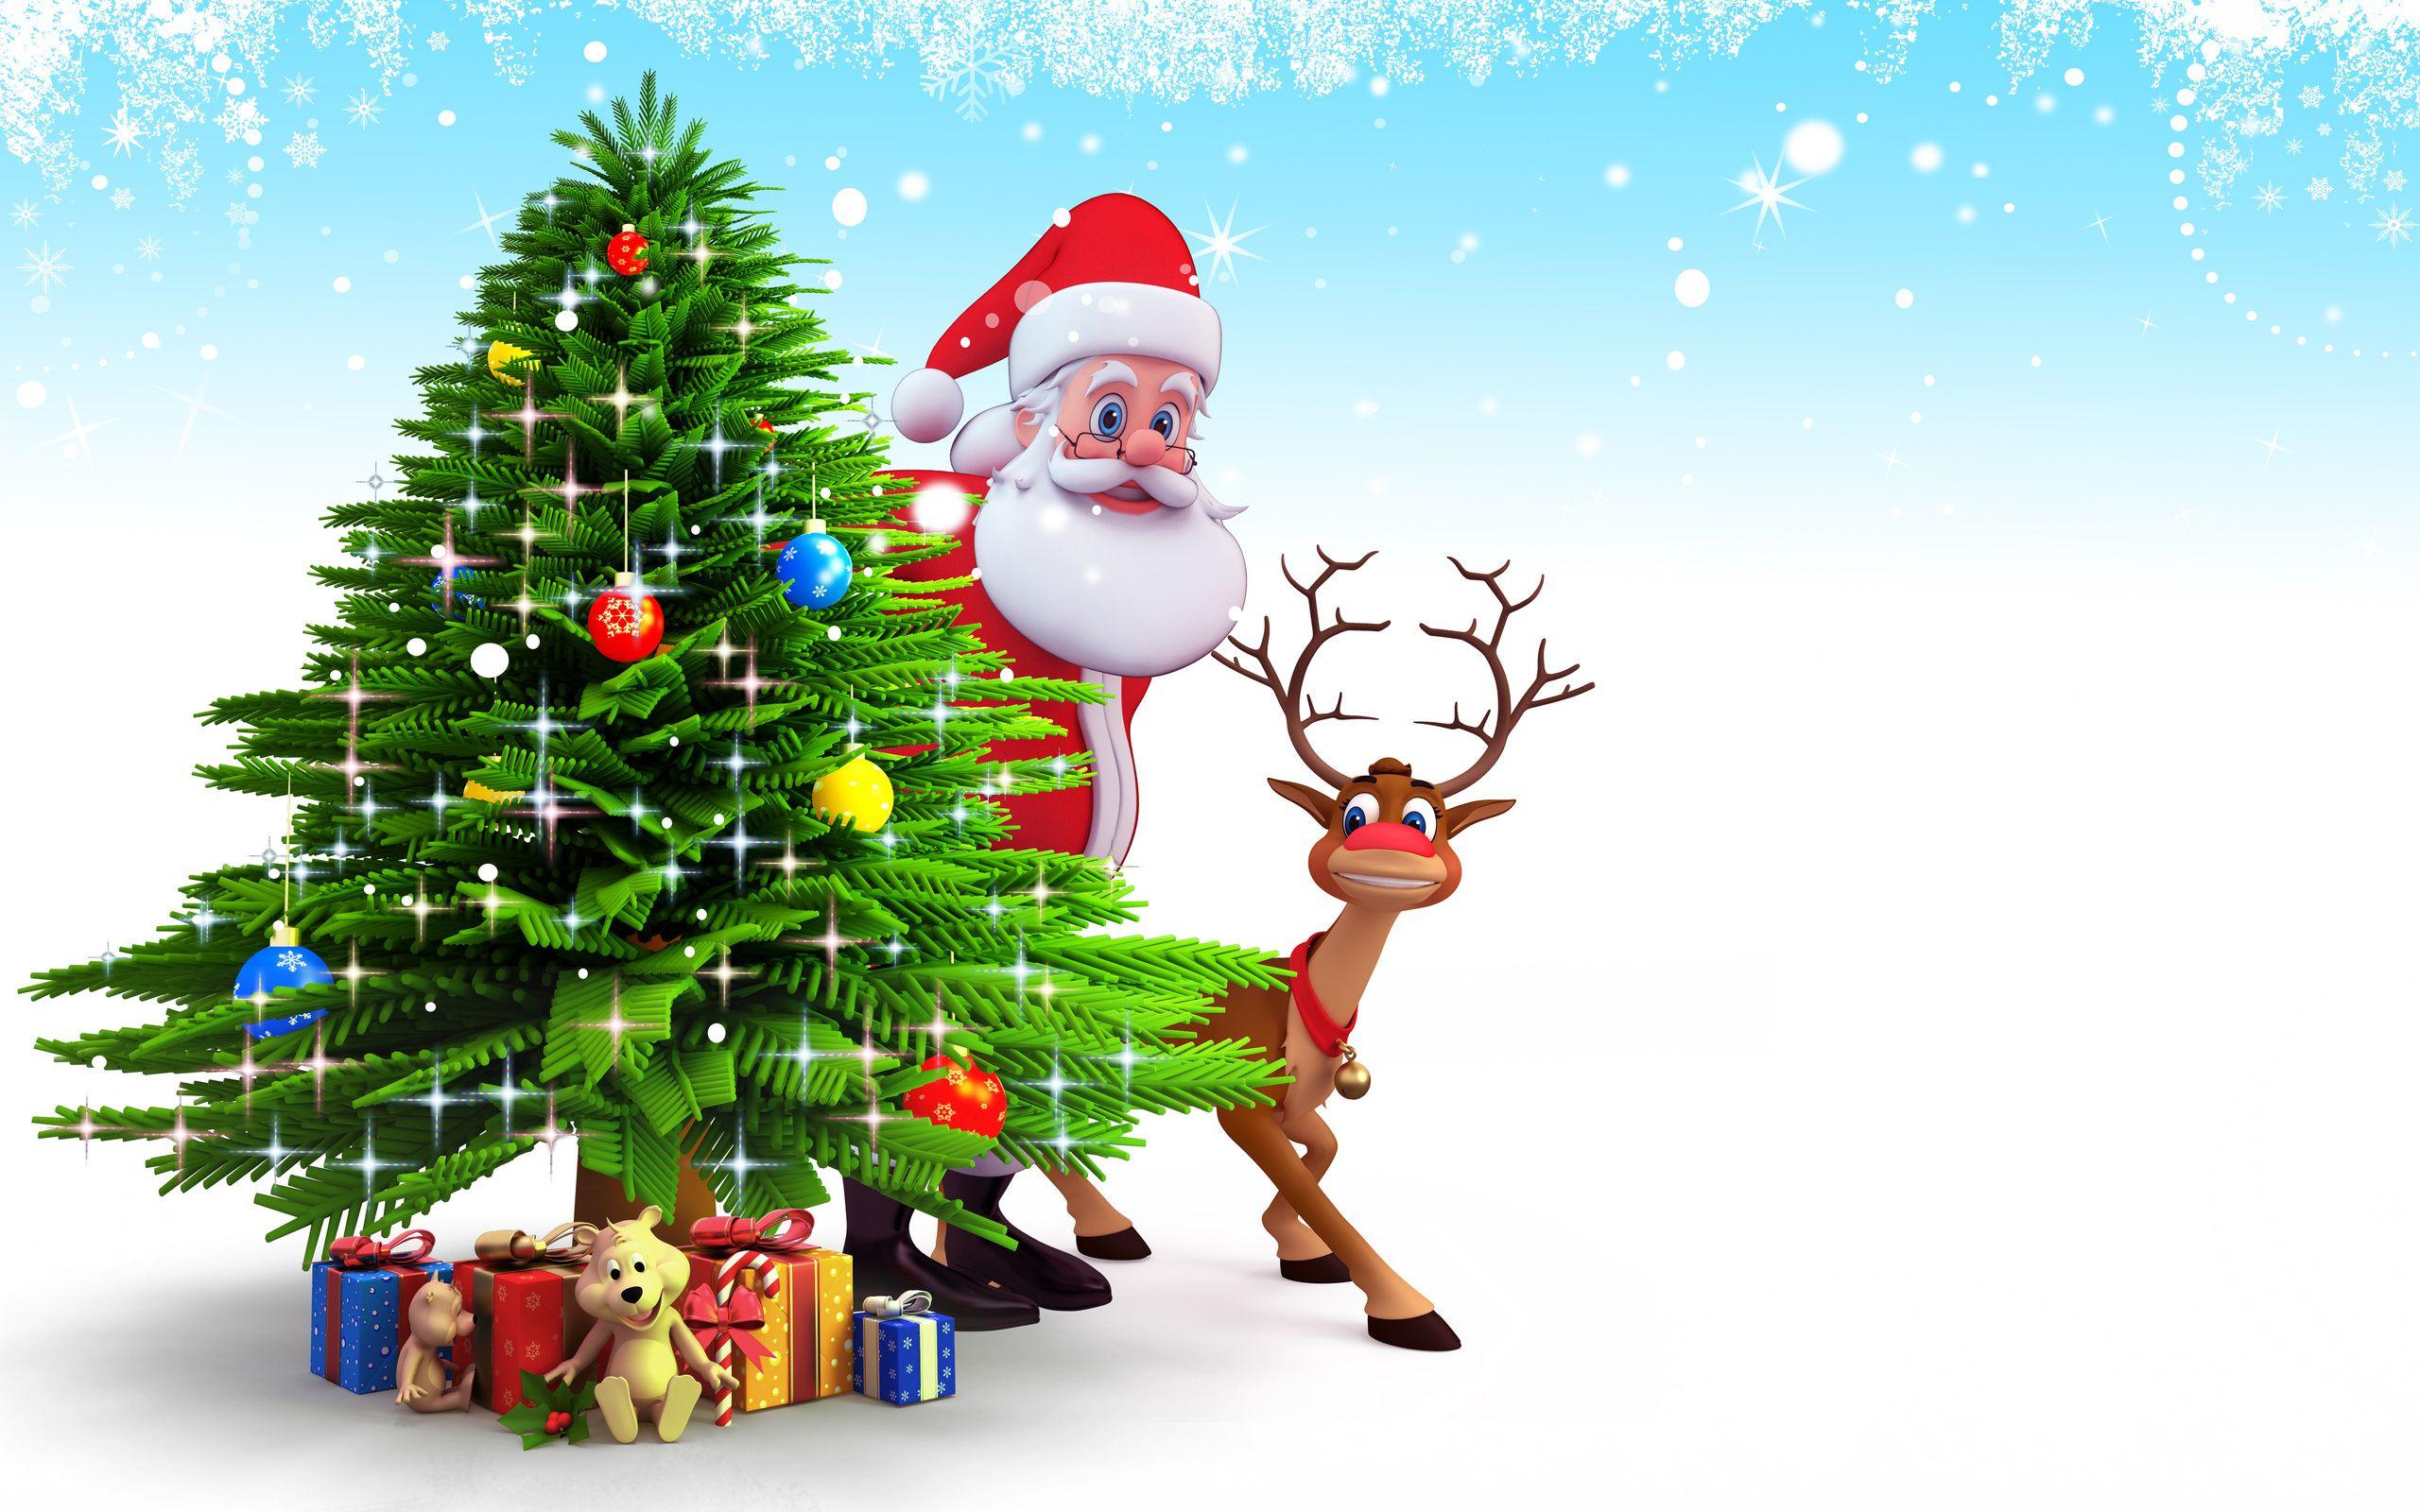 Santa Claus And Reindeer behind christmas tree and gifts